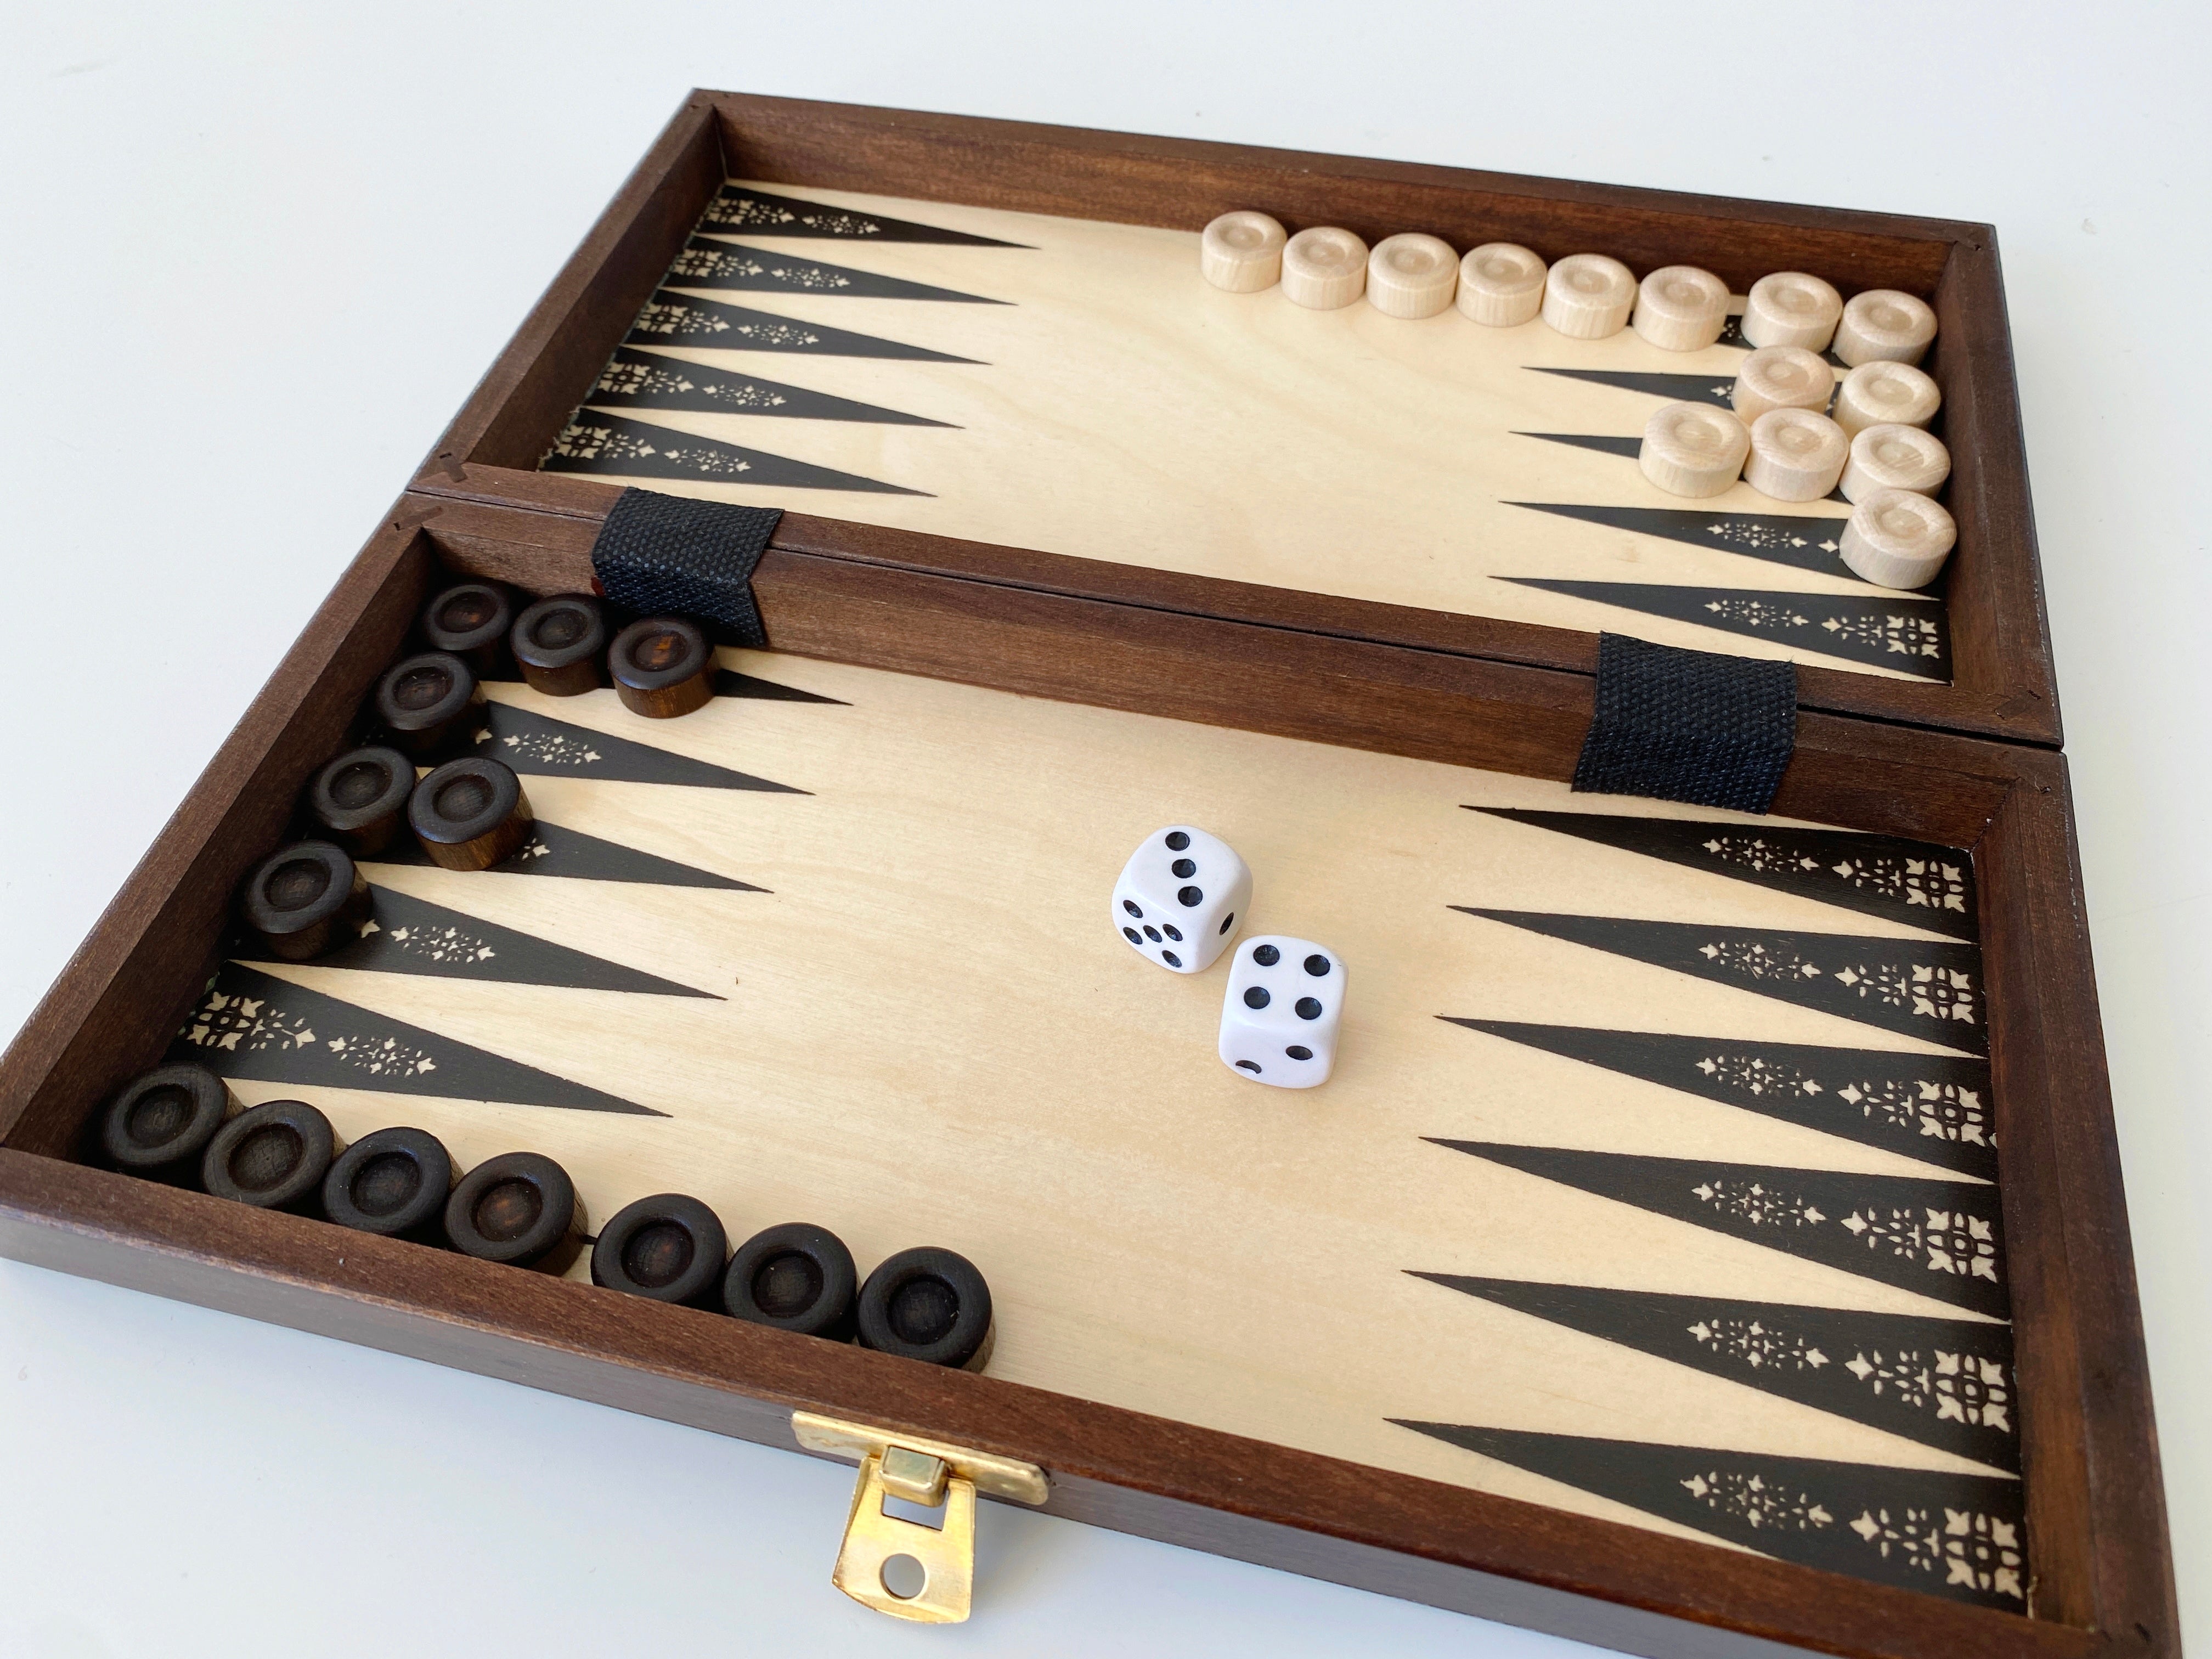 BIG SIZE 3in1 Wooden Chess Set Handmade Backgammon & Checkers 